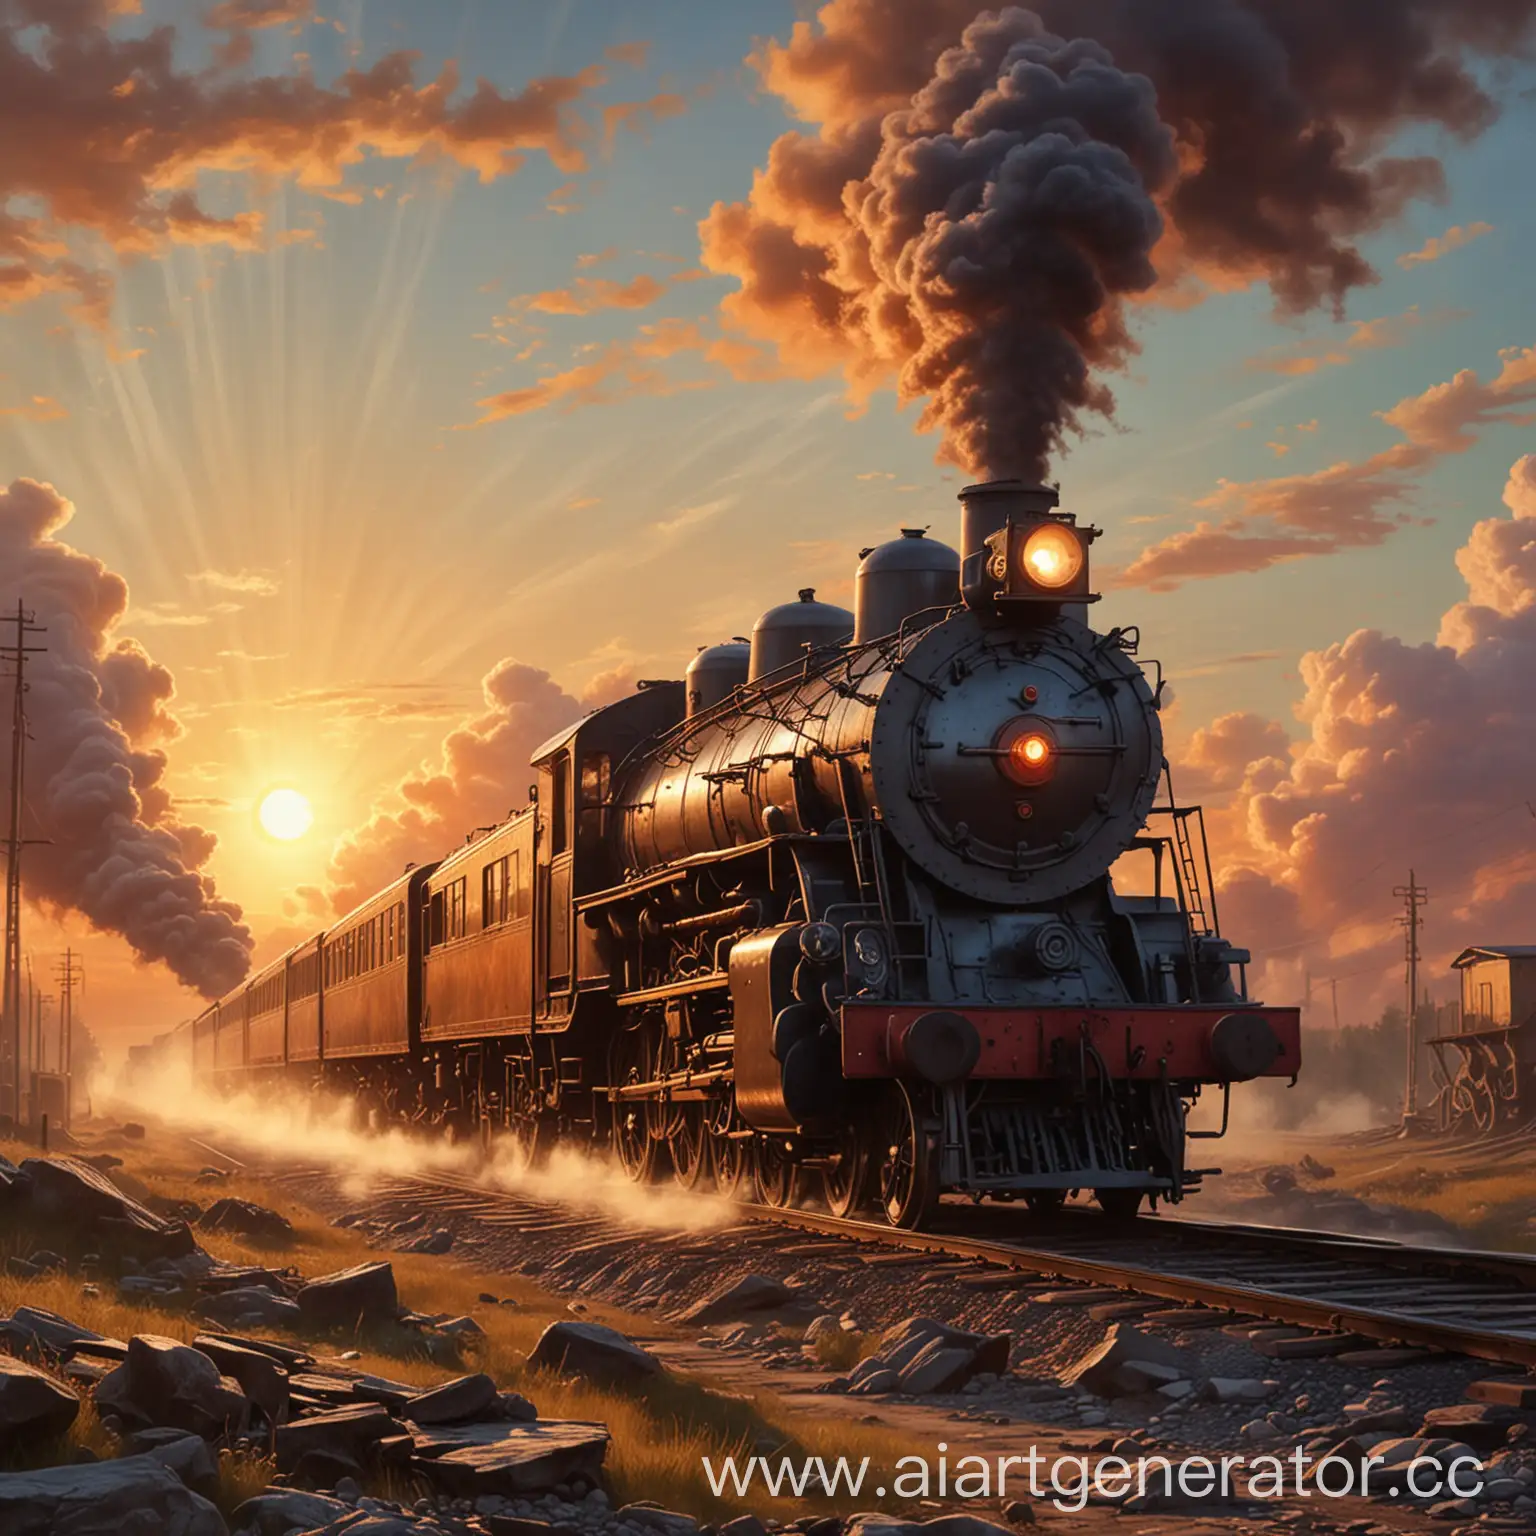 Steam-Locomotive-Going-Towards-Sunset-in-Socialist-Realism-Style